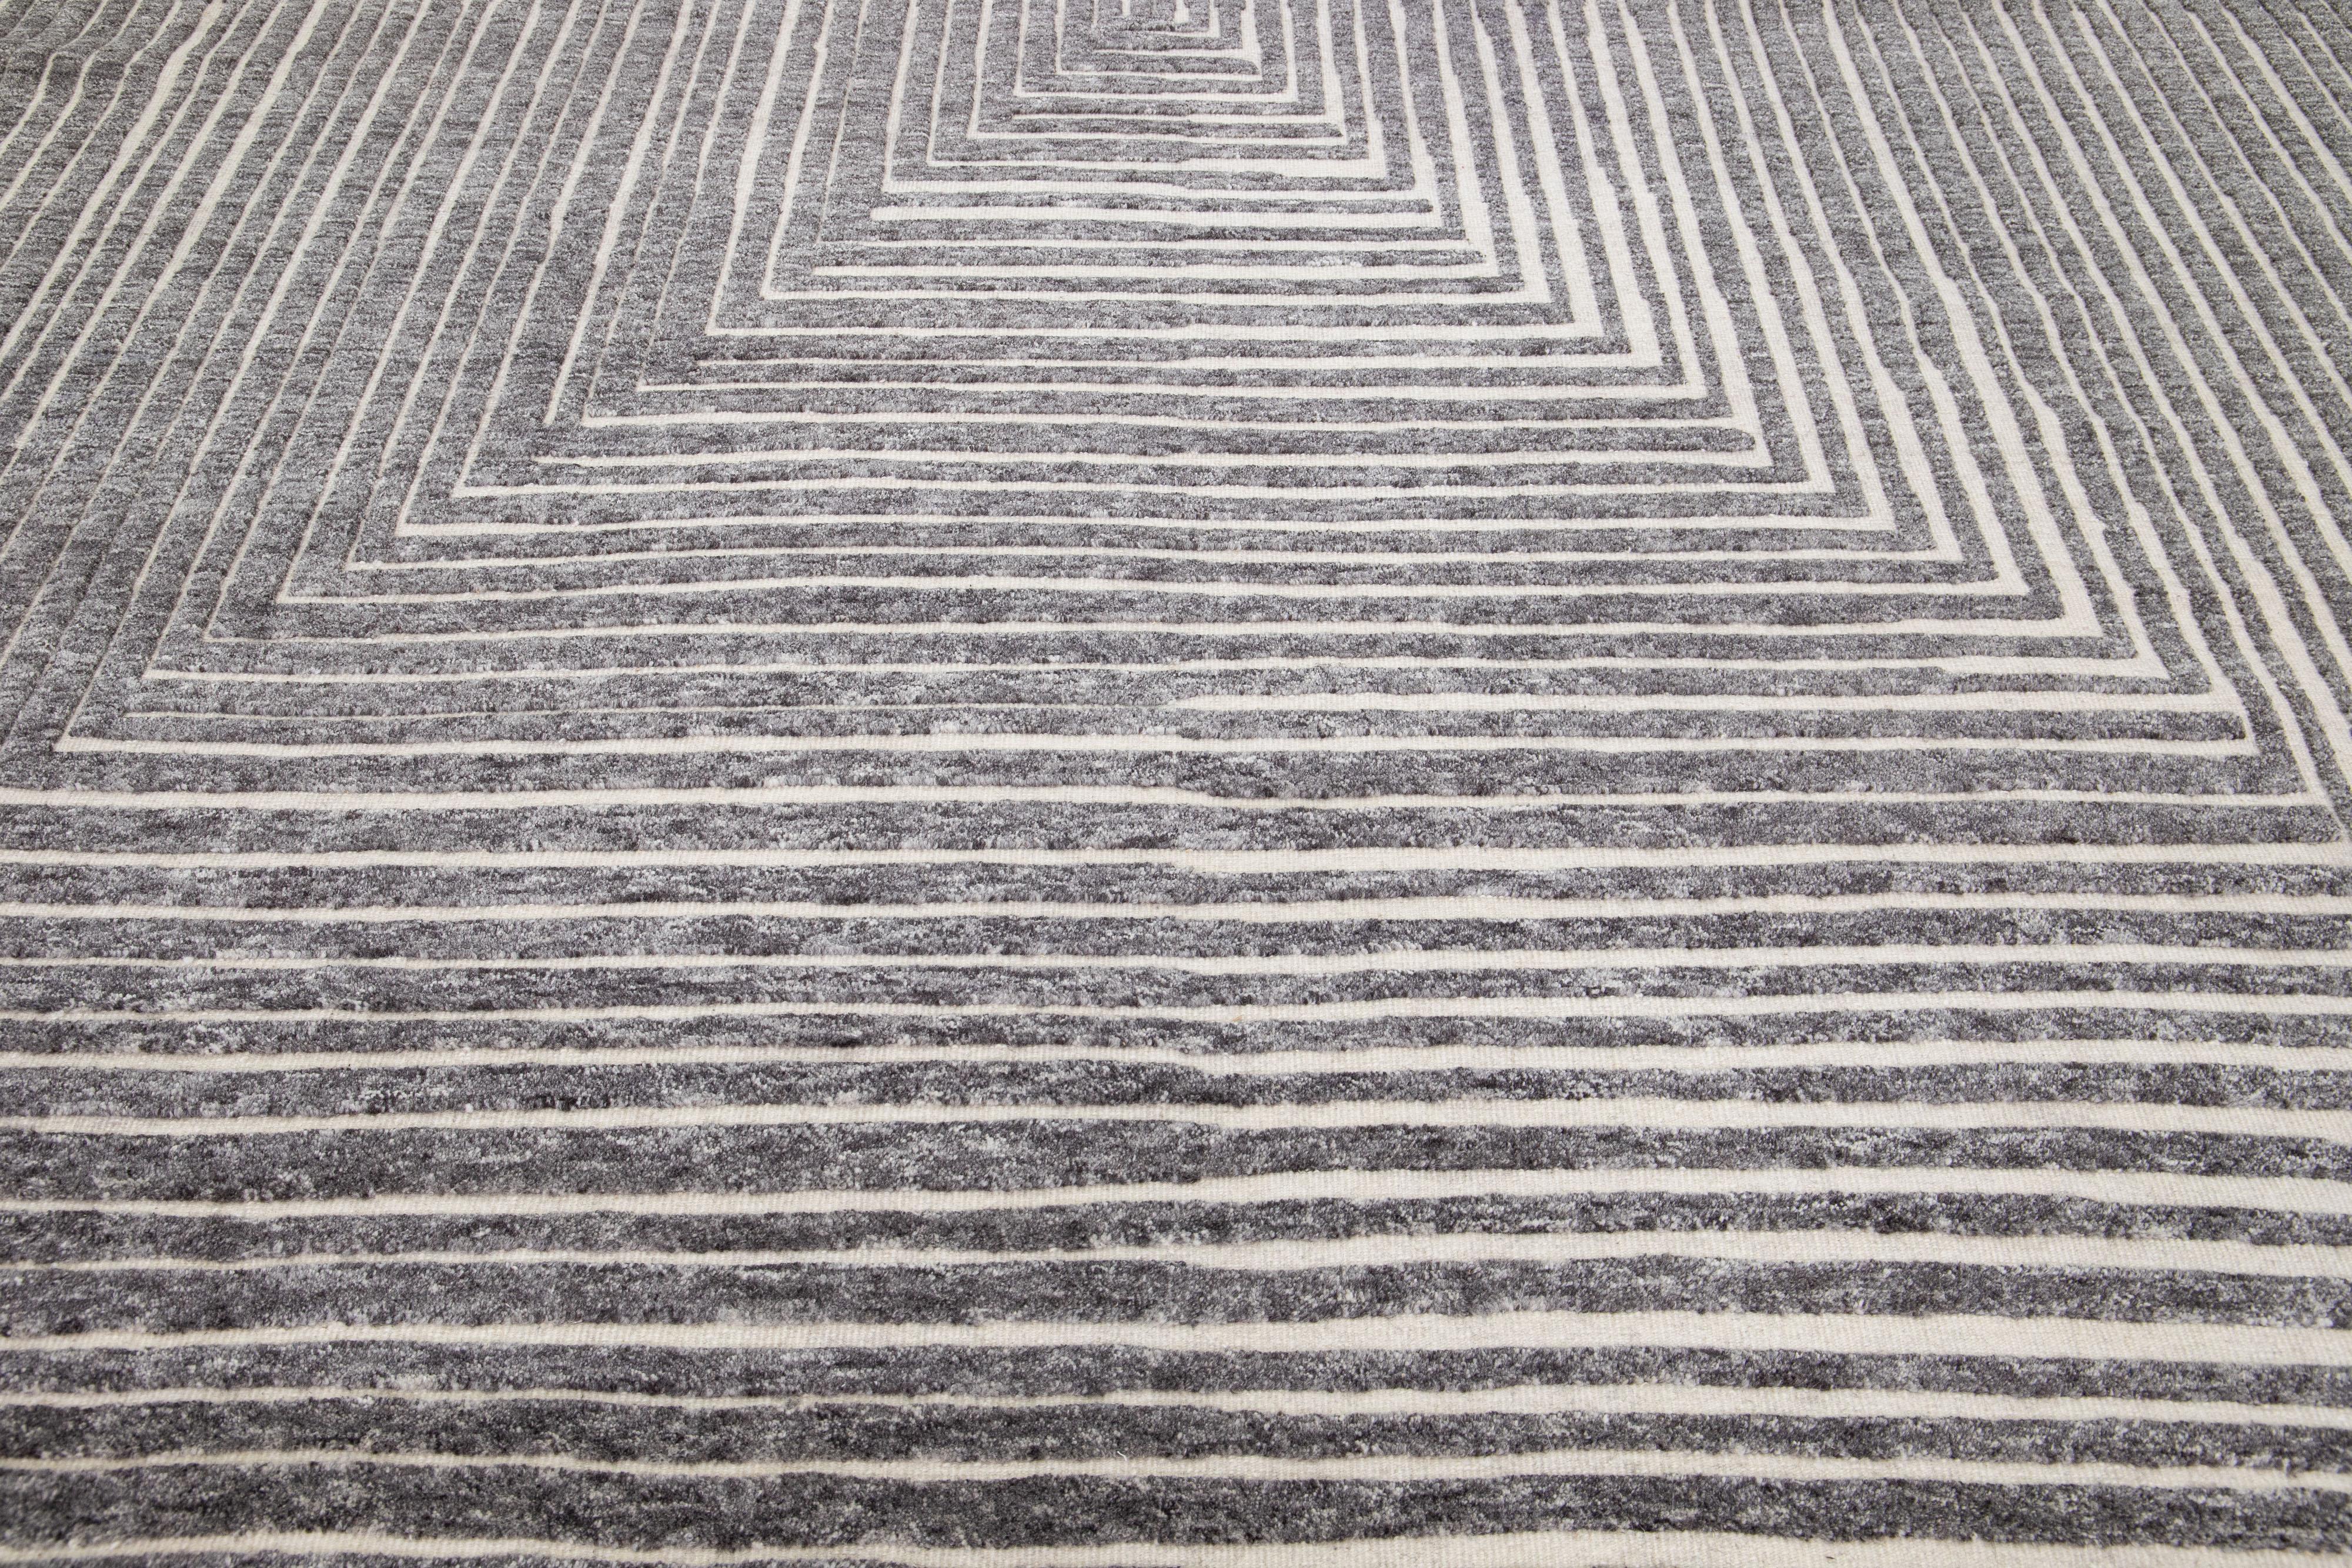 Beautiful modern Moroccan-style hand-knotted wool rug with a beige color field. This rug is part of our Apadana's Safi Collection and features an Op Art squares seamless design in gray.

This rug measures: 10'3